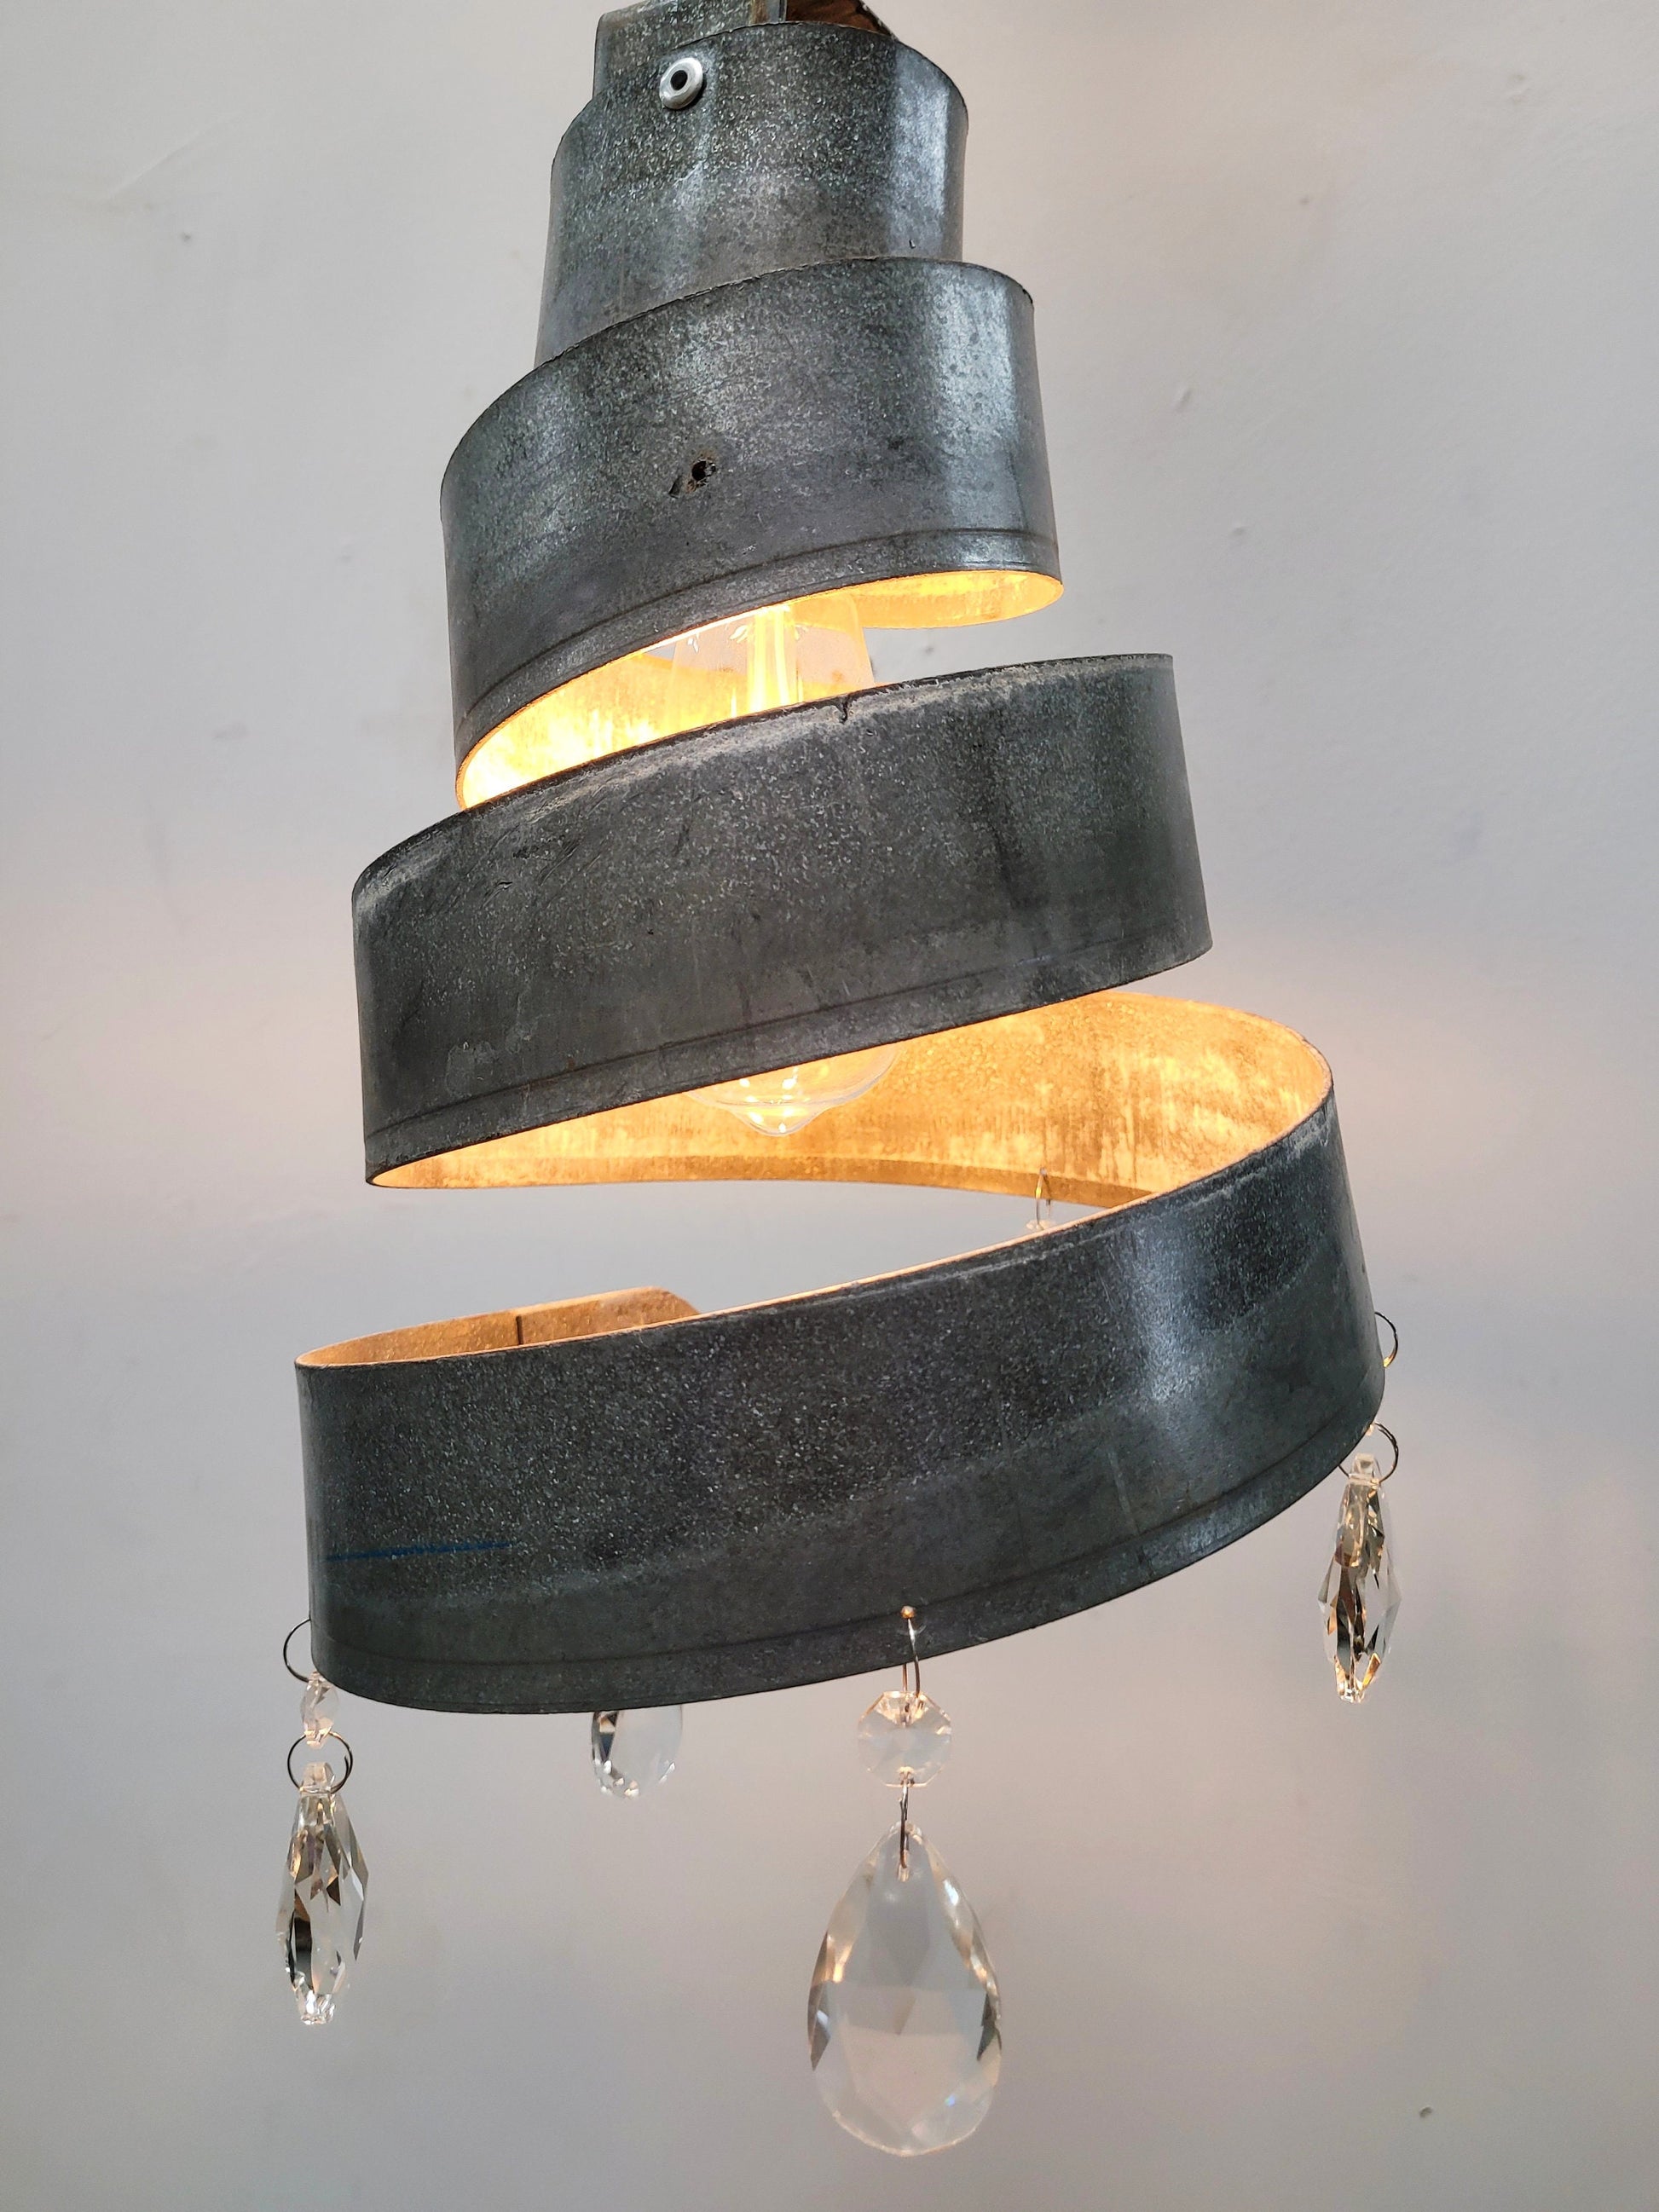 SALE - Set of 2 Jeweled Wine Barrel Ring Pendant Lights - Custom - Made from Retired California wine barrel rings 100% Recycled!